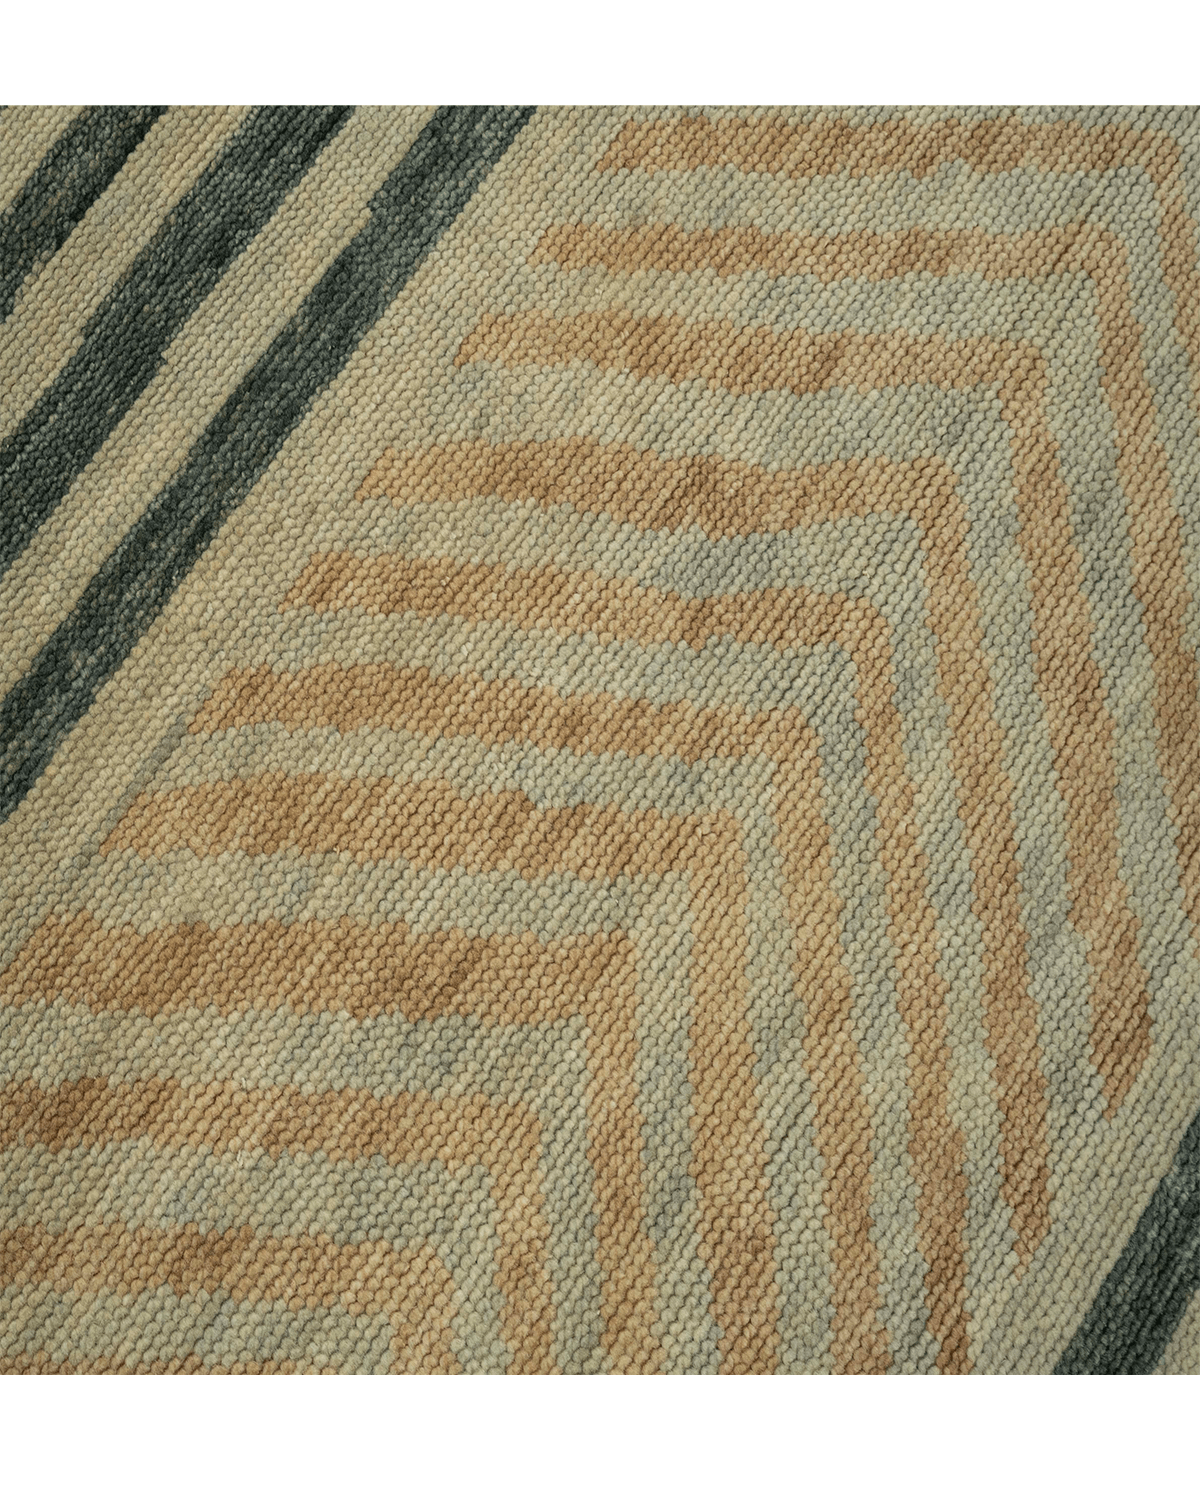 Modern Hand-knotted Rug (S-25B)